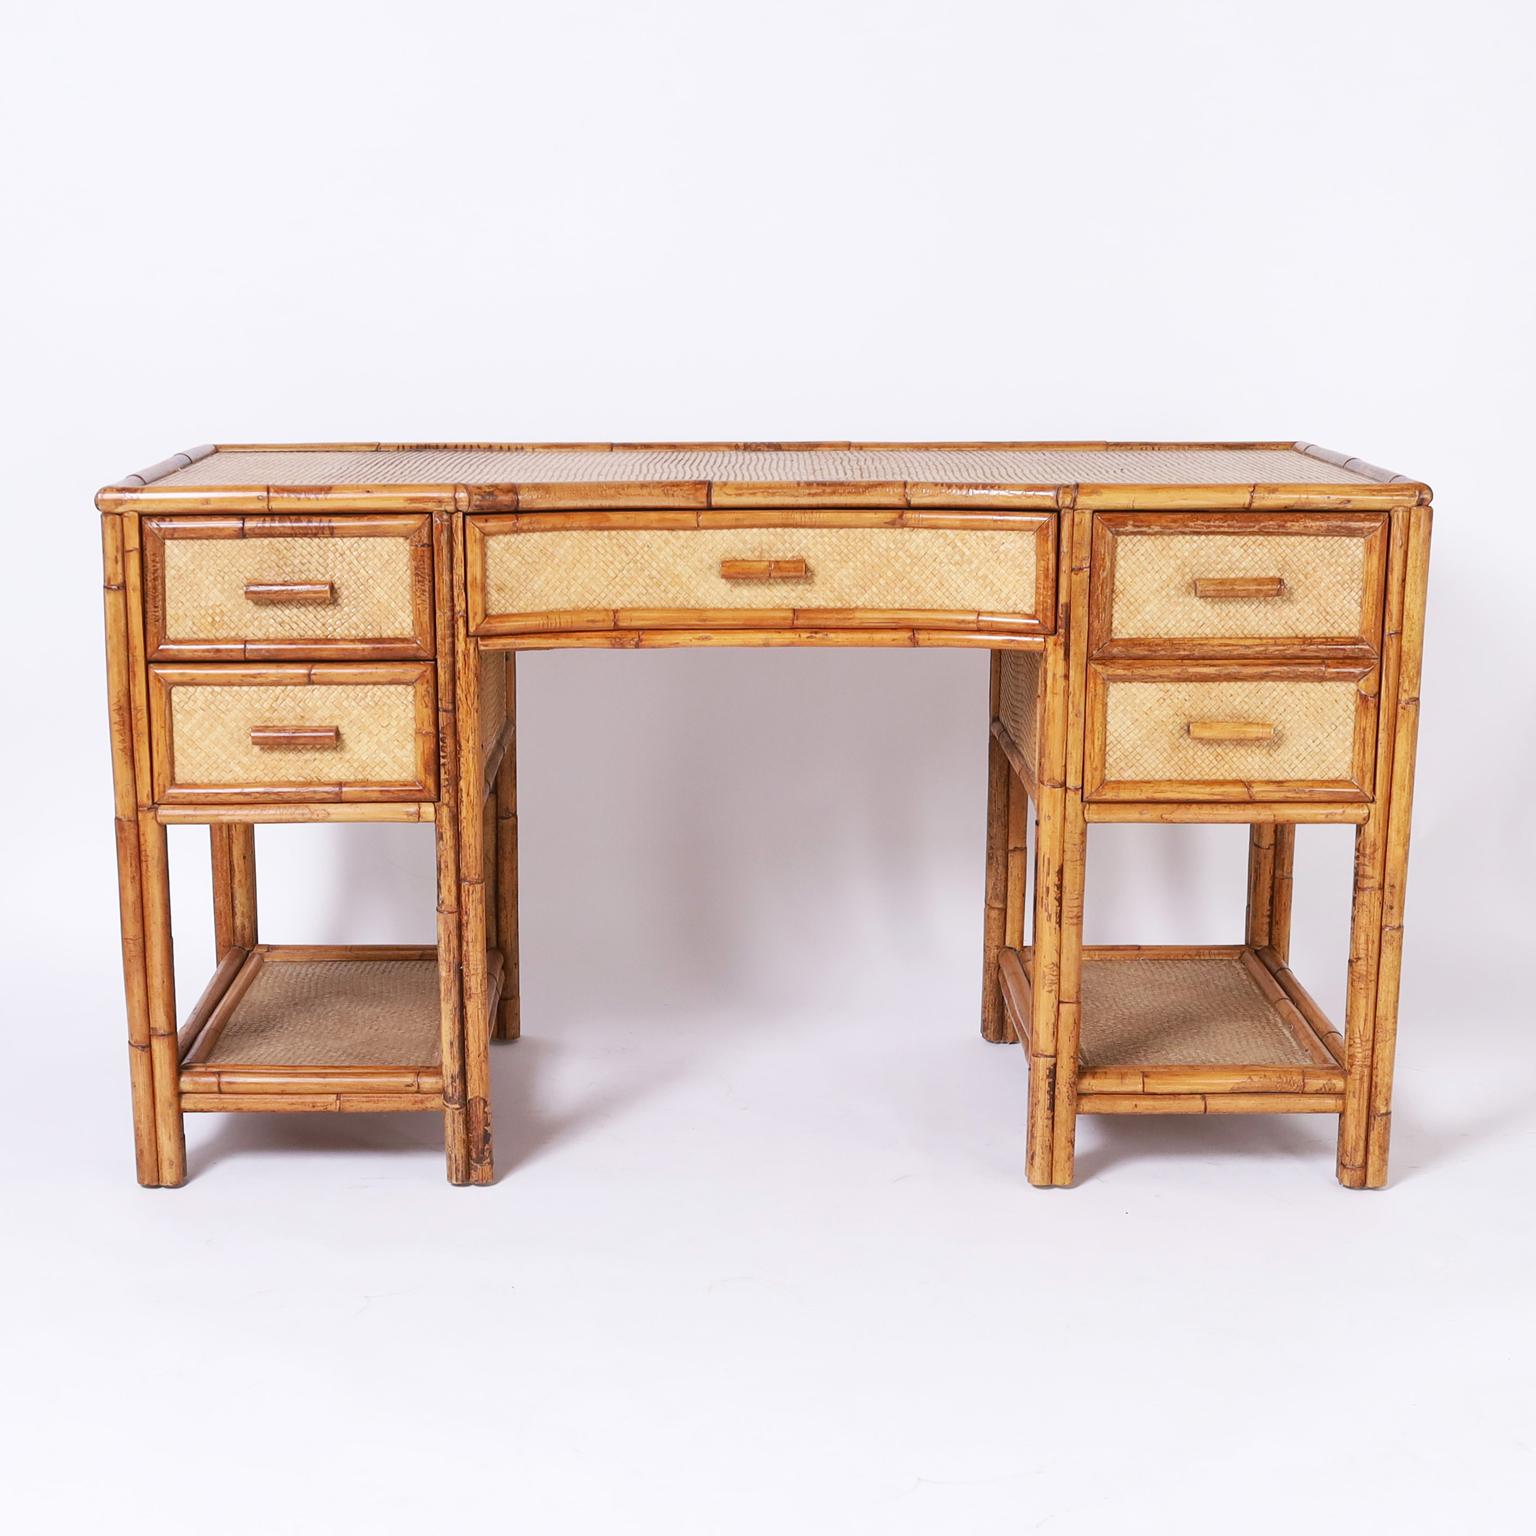 Handsome British Colonial style desk crafted with a bamboo frame and grasscloth panels all around having a concave center drawer and two more on either side over a lower tier. 